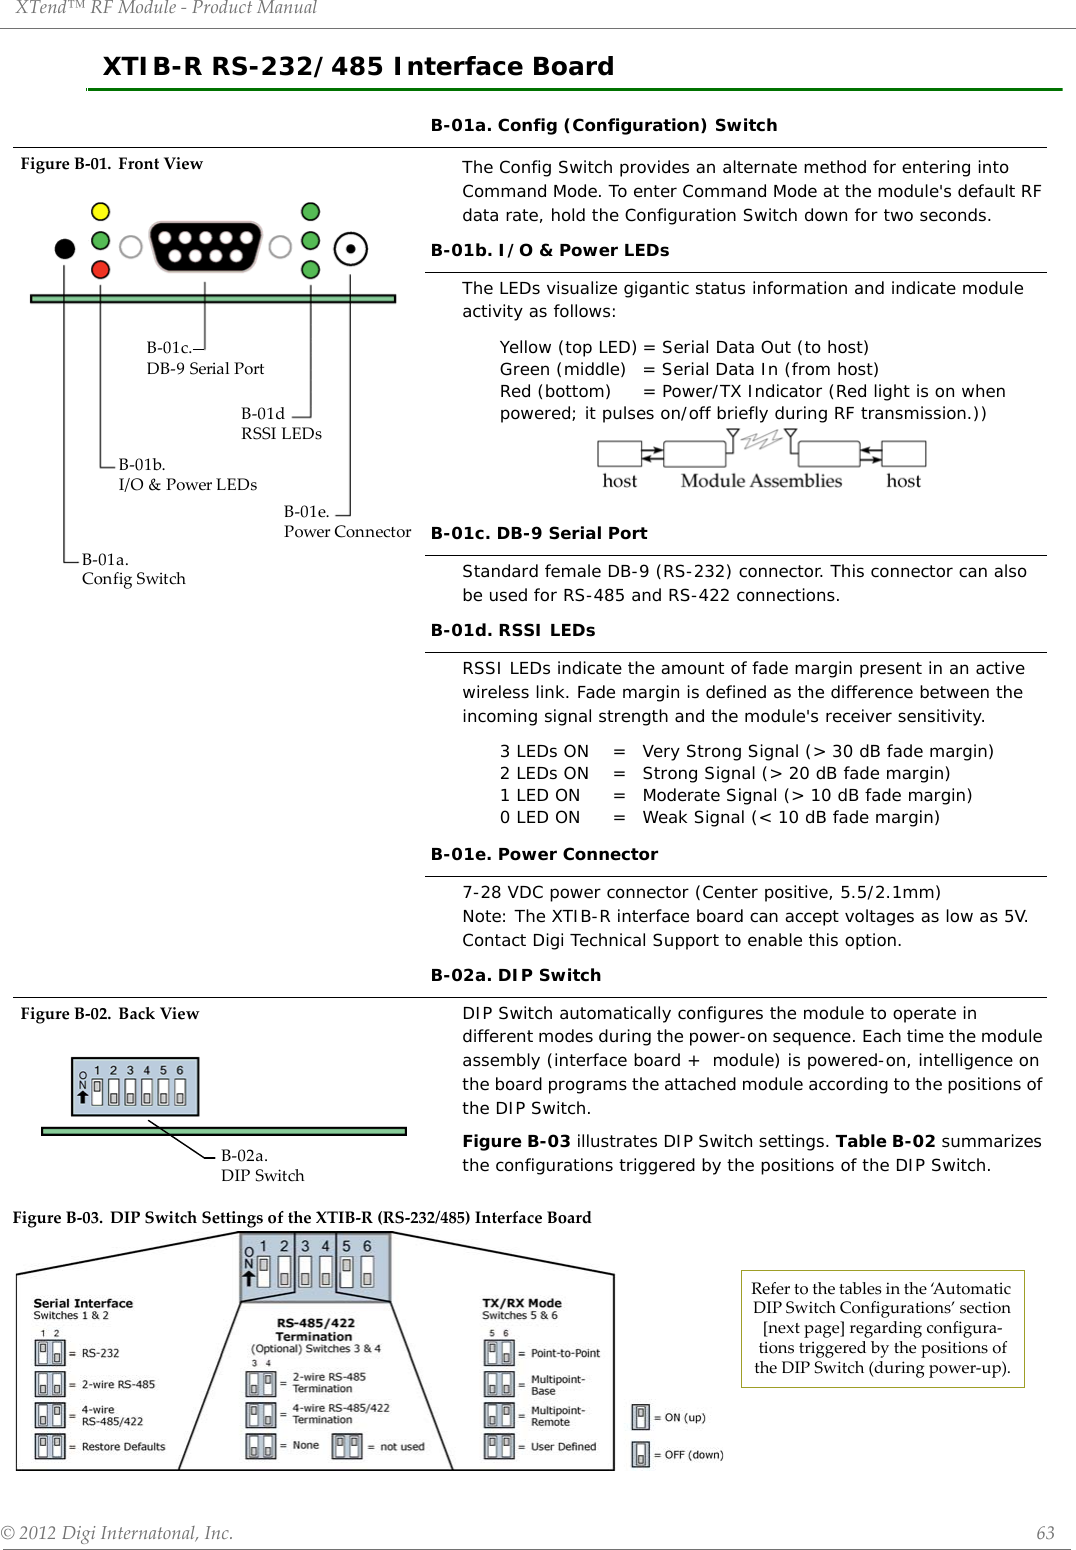 XTend™ RF Module - Product Manual © 2012 Digi Internatonal, Inc.      63XTIB-R RS-232/485 Interface BoardFigure B-03. DIP Switch Settings of the XTIB-R (RS-232/485) Interface Board B-01a. Config (Configuration) SwitchFigure B-01. Front View The Config Switch provides an alternate method for entering into Command Mode. To enter Command Mode at the module&apos;s default RF data rate, hold the Configuration Switch down for two seconds. B-01b. I/O &amp; Power LEDsThe LEDs visualize gigantic status information and indicate module activity as follows:Yellow (top LED) = Serial Data Out (to host)Green (middle)  = Serial Data In (from host)Red (bottom)  = Power/TX Indicator (Red light is on when powered; it pulses on/off briefly during RF transmission.)) B-01c. DB-9 Serial PortStandard female DB-9 (RS-232) connector. This connector can also be used for RS-485 and RS-422 connections. B-01d. RSSI LEDsRSSI LEDs indicate the amount of fade margin present in an active wireless link. Fade margin is defined as the difference between the incoming signal strength and the module&apos;s receiver sensitivity.3 LEDs ON = Very Strong Signal (&gt; 30 dB fade margin)2 LEDs ON = Strong Signal (&gt; 20 dB fade margin)1 LED ON = Moderate Signal (&gt; 10 dB fade margin)0 LED ON = Weak Signal (&lt; 10 dB fade margin) B-01e. Power Connector7-28 VDC power connector (Center positive, 5.5/2.1mm) Note: The XTIB-R interface board can accept voltages as low as 5V. Contact Digi Technical Support to enable this option. B-02a. DIP SwitchFigure B-02. Back View DIP Switch automatically configures the module to operate in different modes during the power-on sequence. Each time the module assembly (interface board +  module) is powered-on, intelligence on the board programs the attached module according to the positions of the DIP Switch.Figure B-03 illustrates DIP Switch settings. Table B-02 summarizes the configurations triggered by the positions of the DIP Switch.B-01a.Config SwitchB-01b.I/O &amp; Power LEDsB-01c.DB-9 Serial PortB-01dRSSI LEDsB-01e.Power ConnectorB-02a.DIP SwitchRefer to the tables in the ‘Automatic DIP Switch Configurations’ section [next page] regarding configura-tions triggered by the positions of the DIP Switch (during power-up).